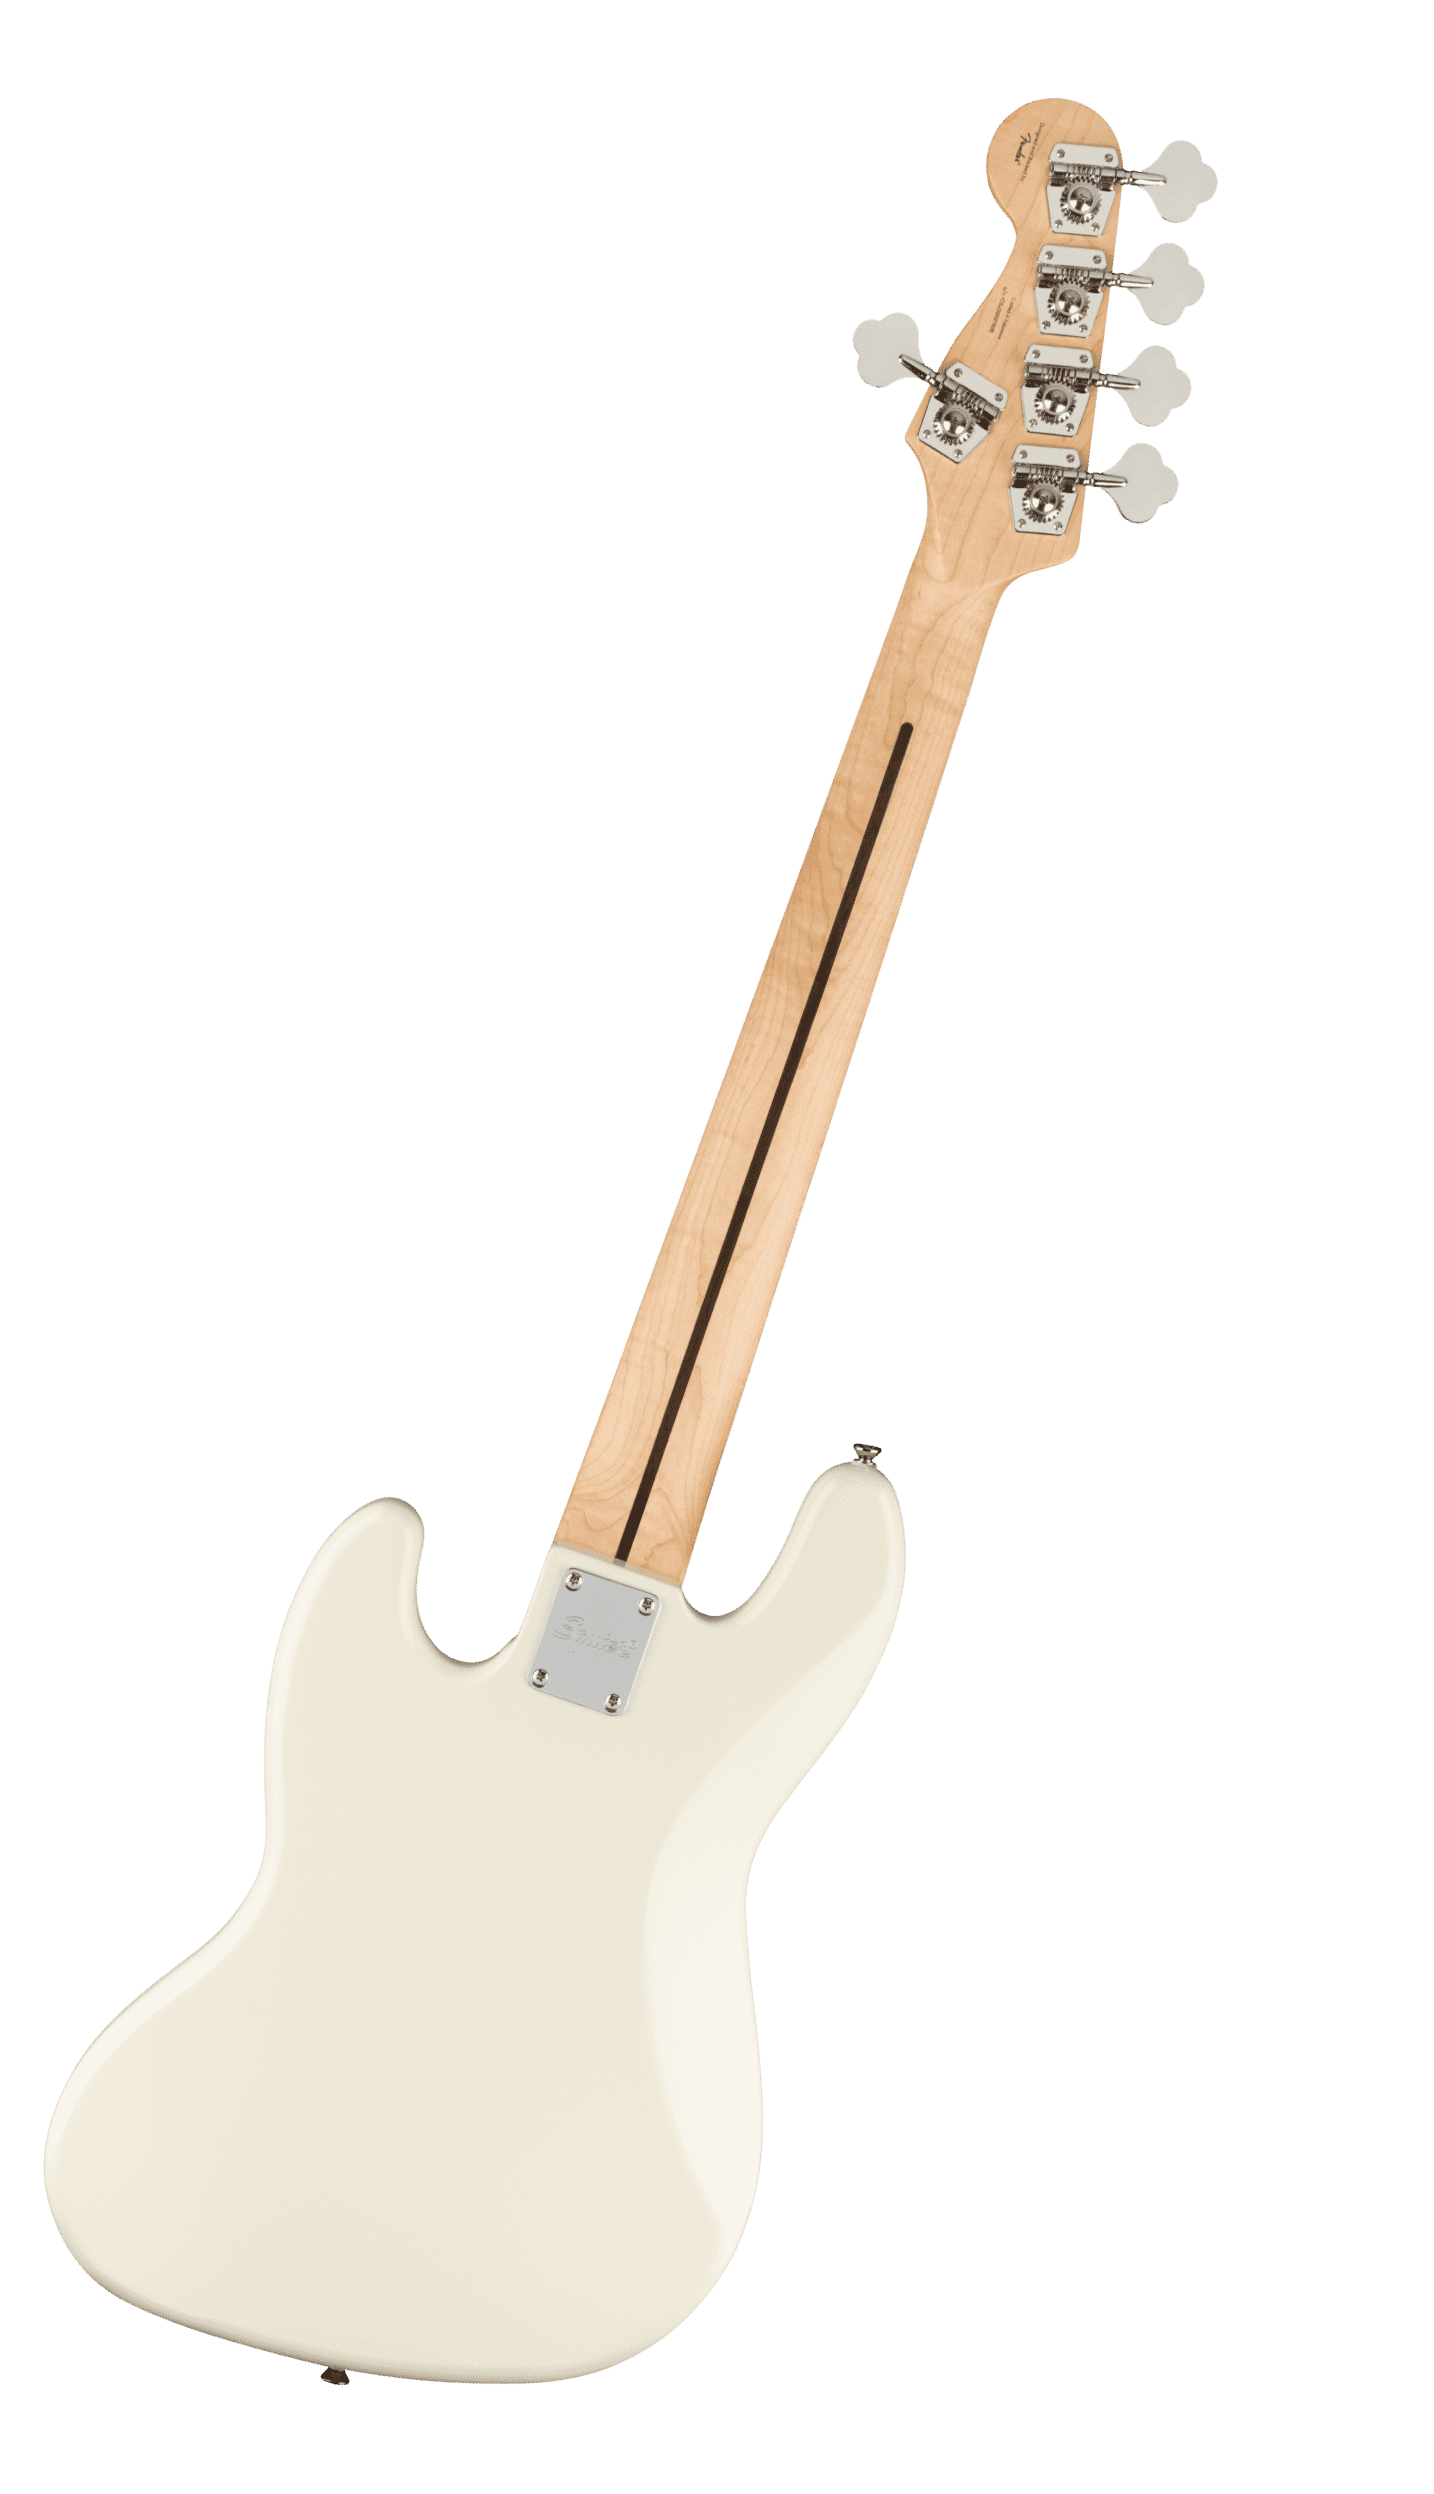 Squier Affinity Series Jazz Bass V, Olympic White